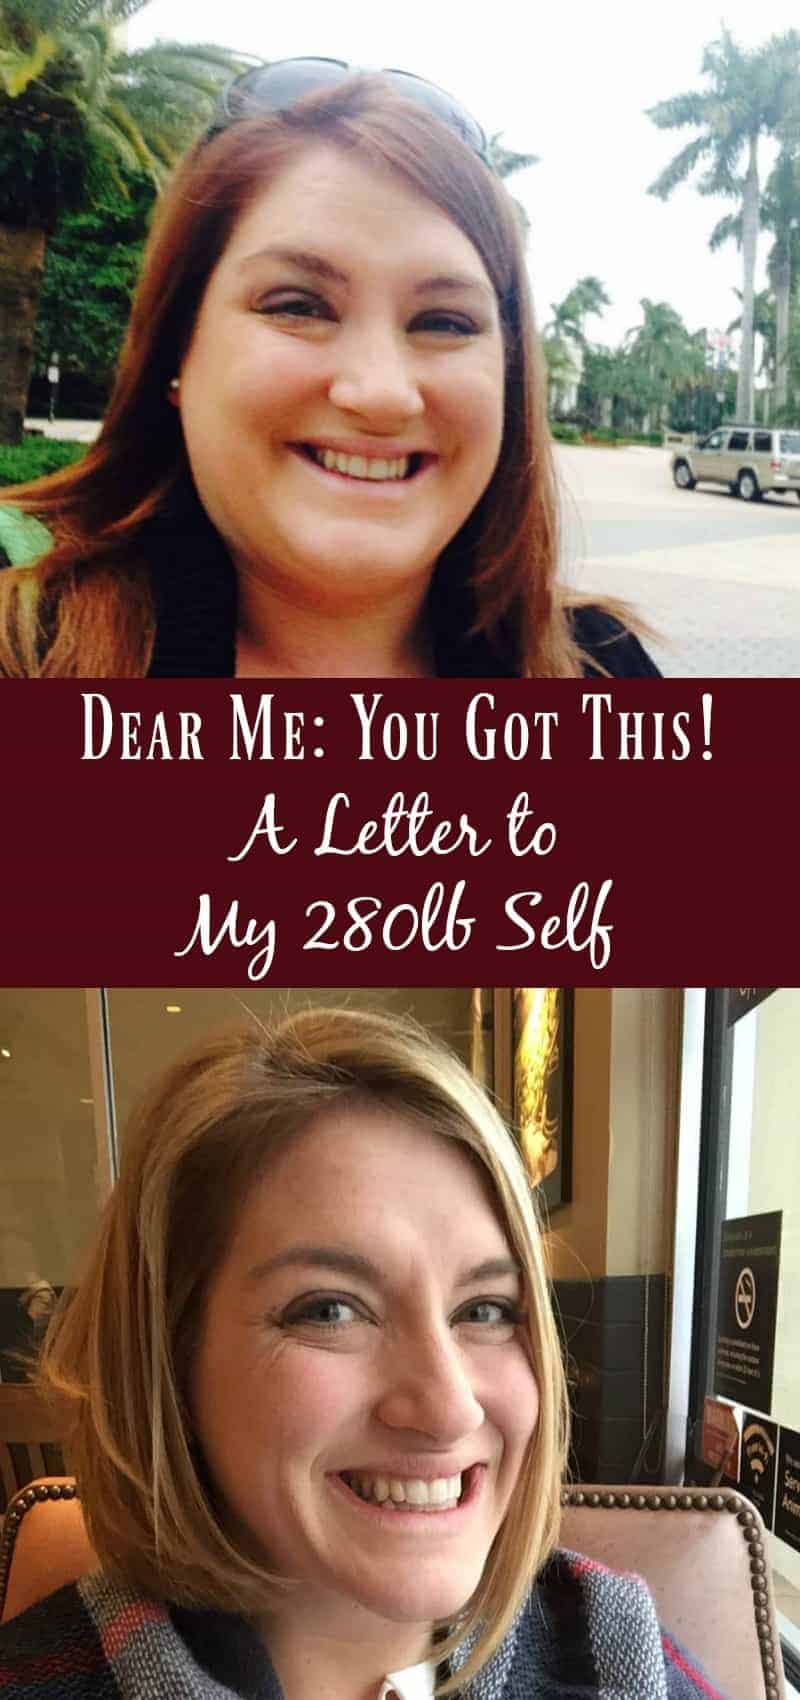 A open letter to my 280lb self